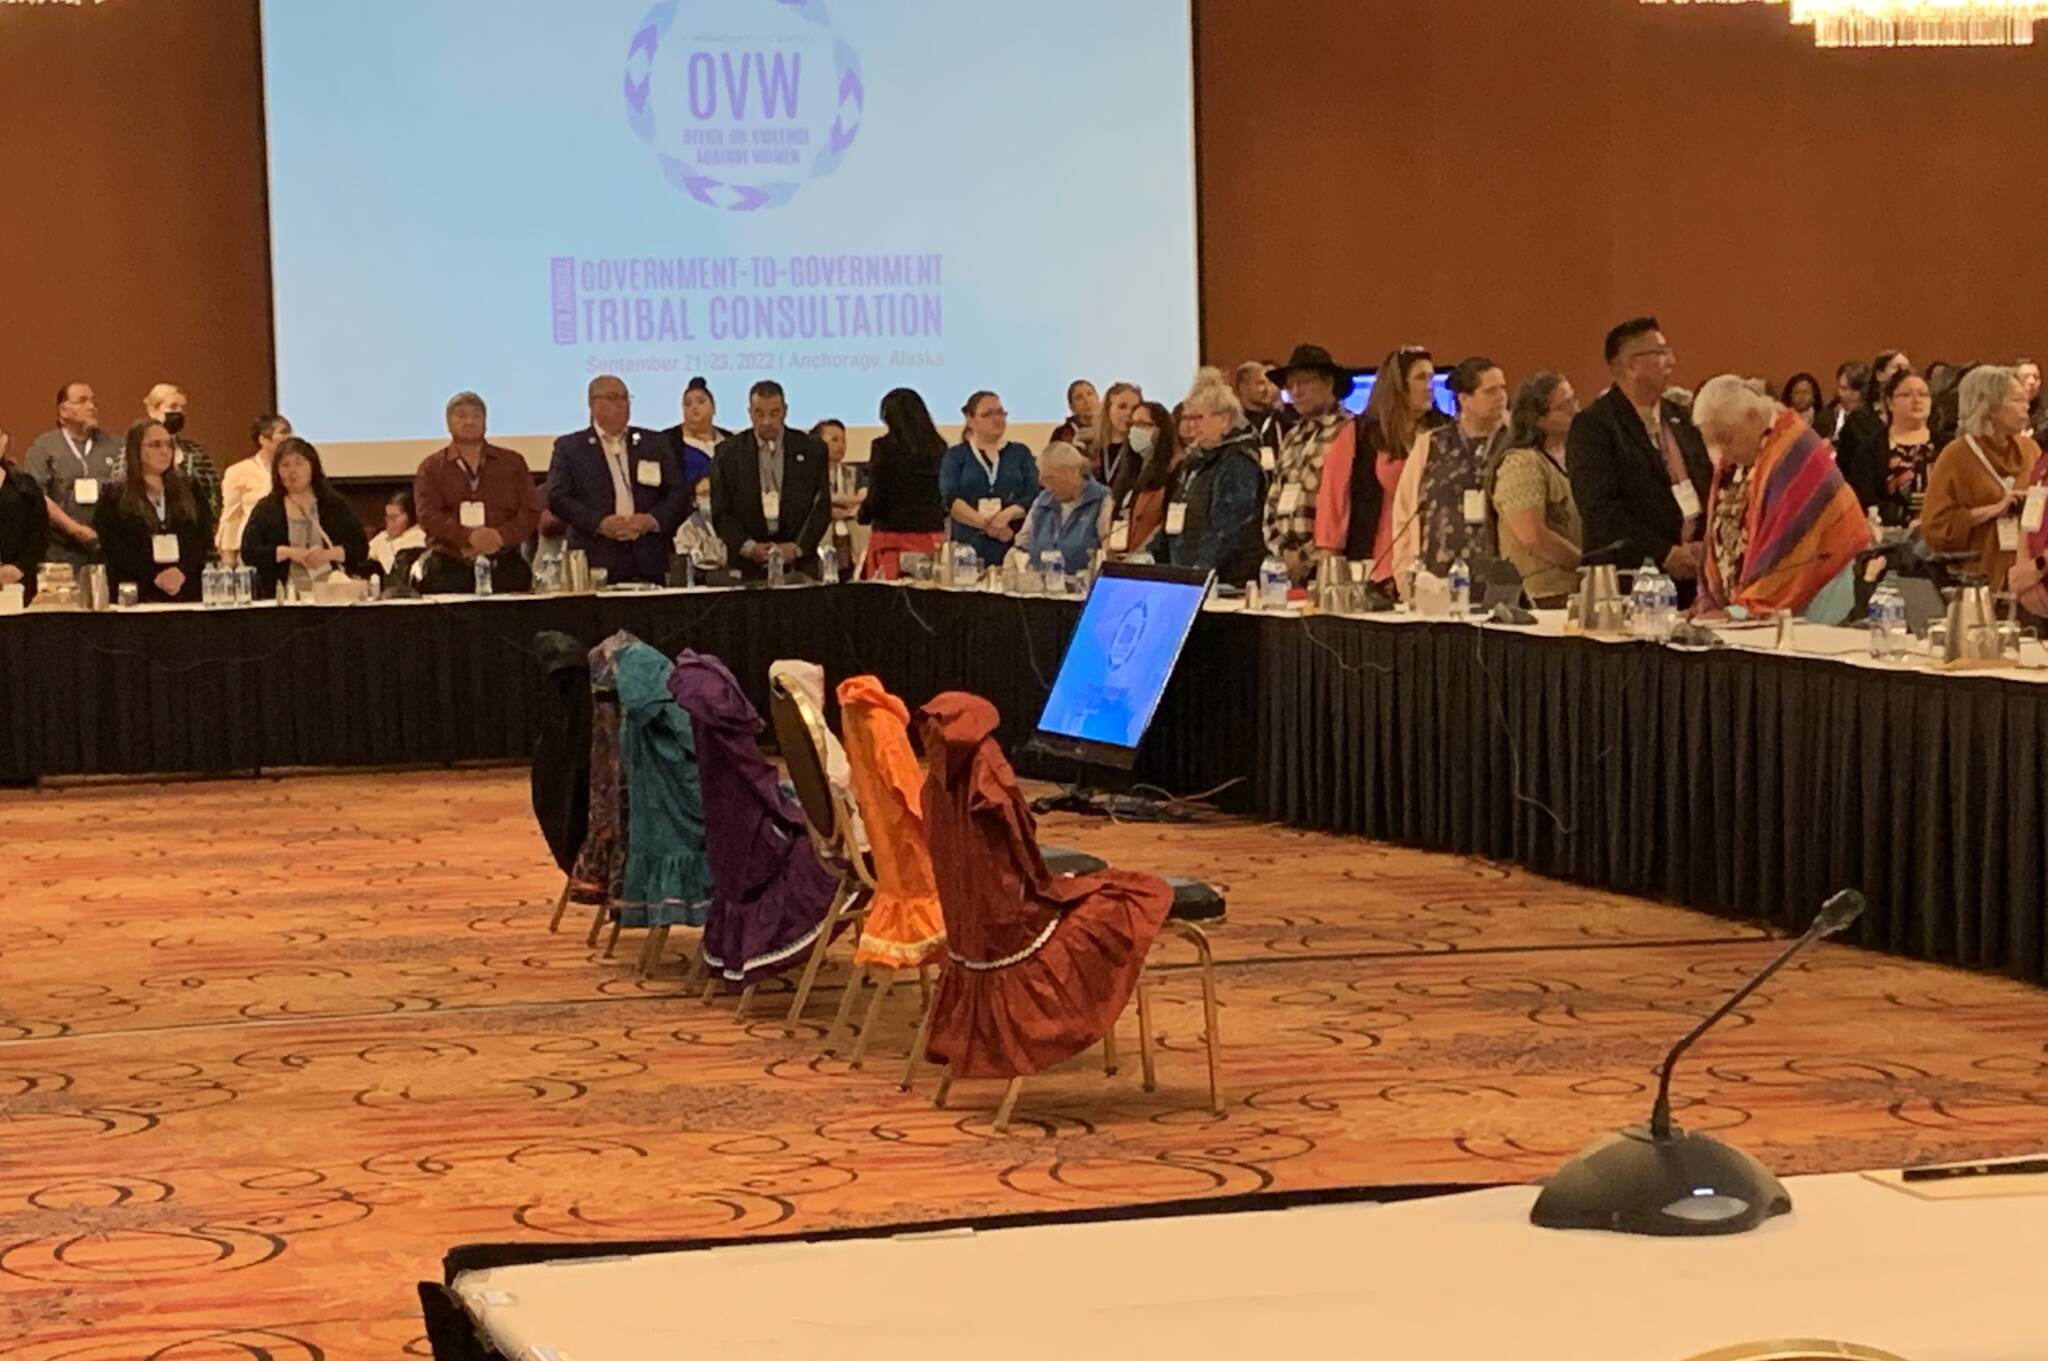 Attendees of a government-to-government consultation look on as kuspuks were displayed during the Violence Against Women Tribal Consultation held this week in Anchorage. (Courtesy Photo / Lisa Houghton)